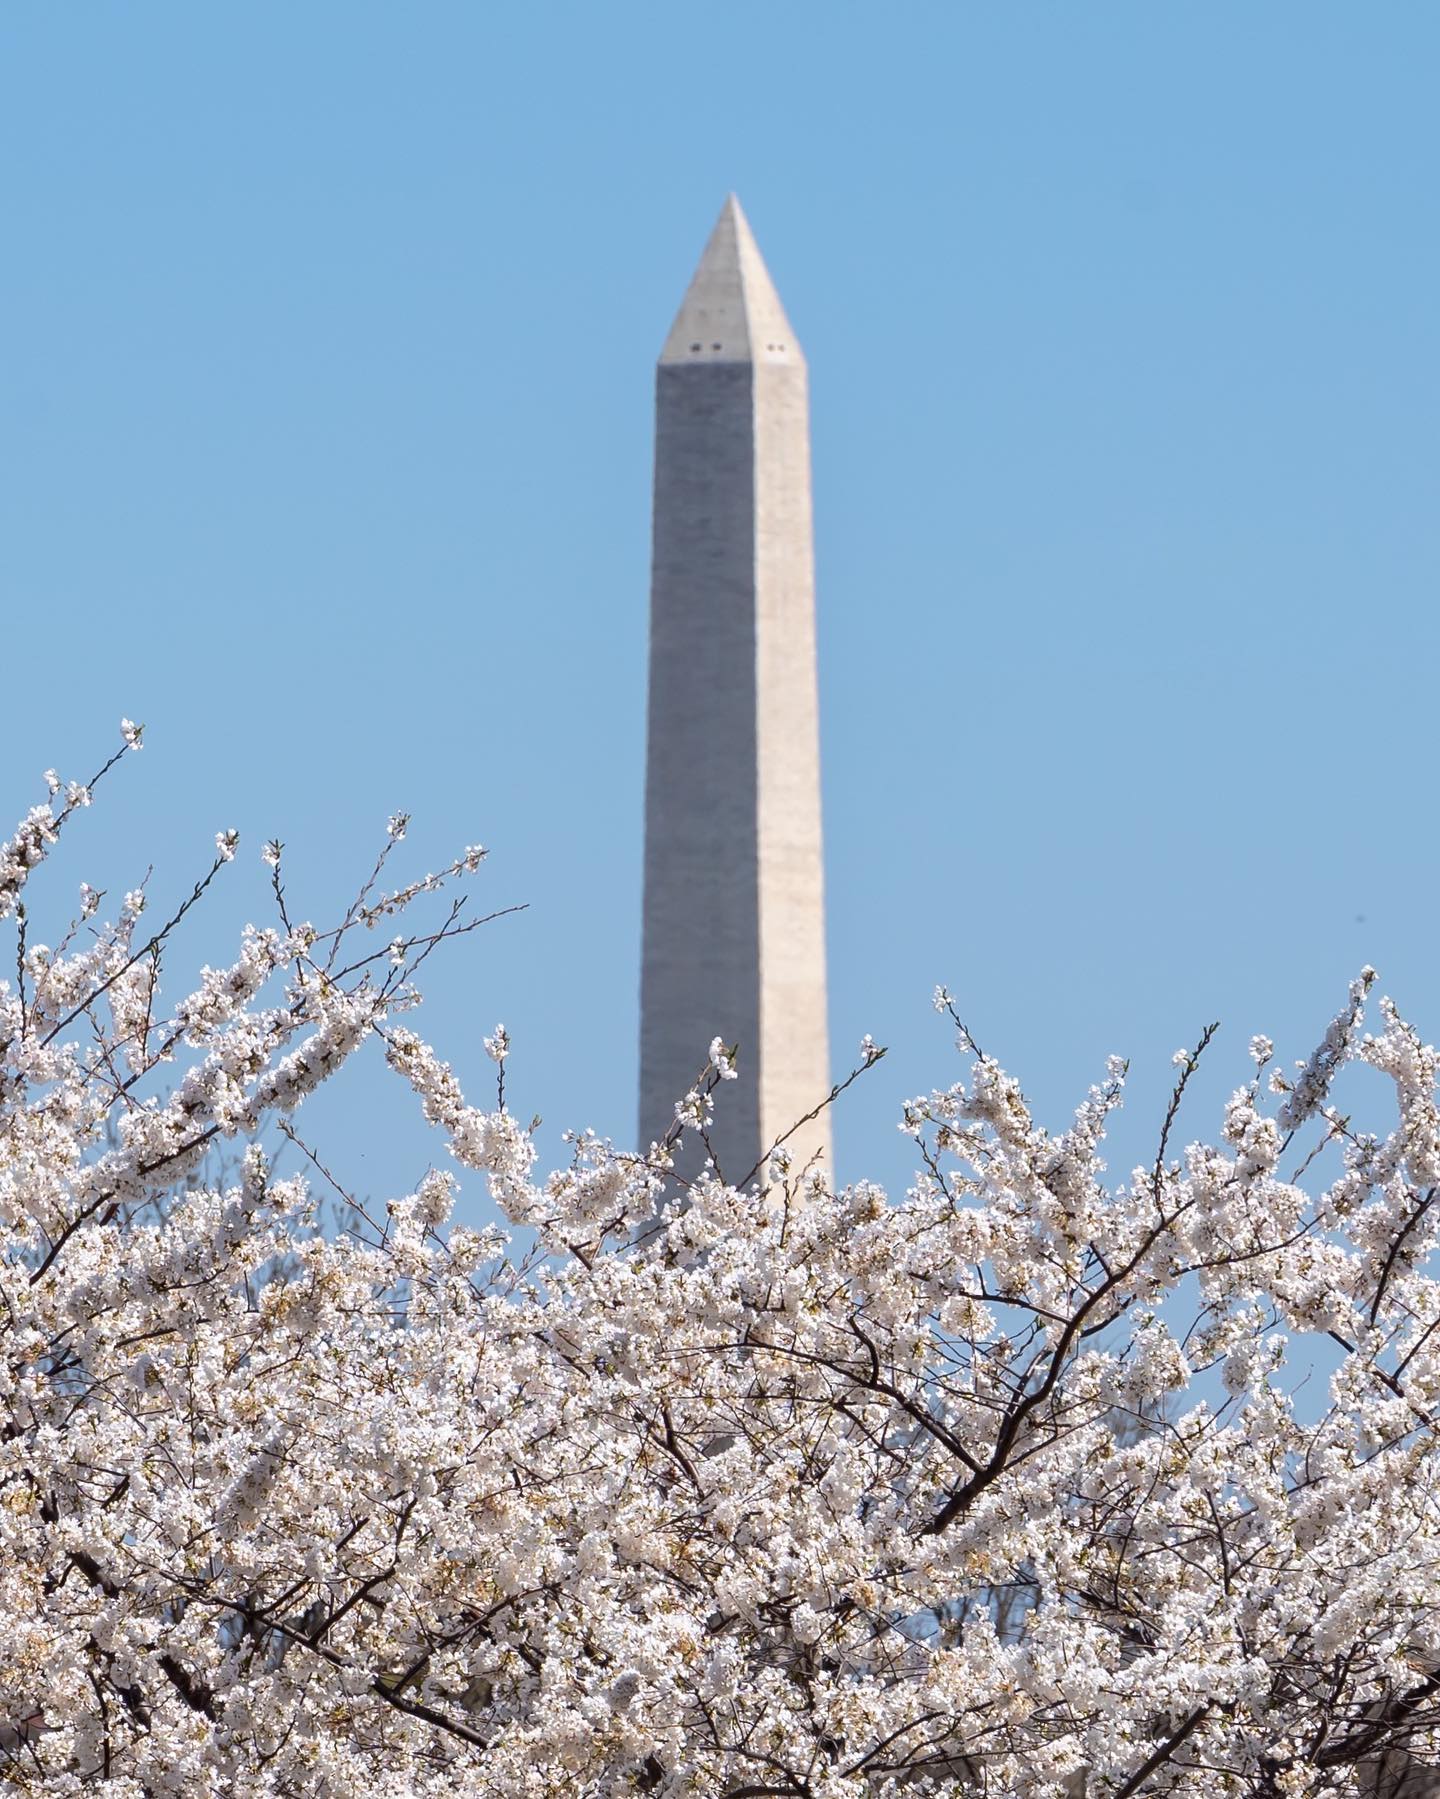 The Cherry Blossoms are out in all their splendor at Arlington National Cemetery, blanketing these hallowed grounds with their pinky blossoms.